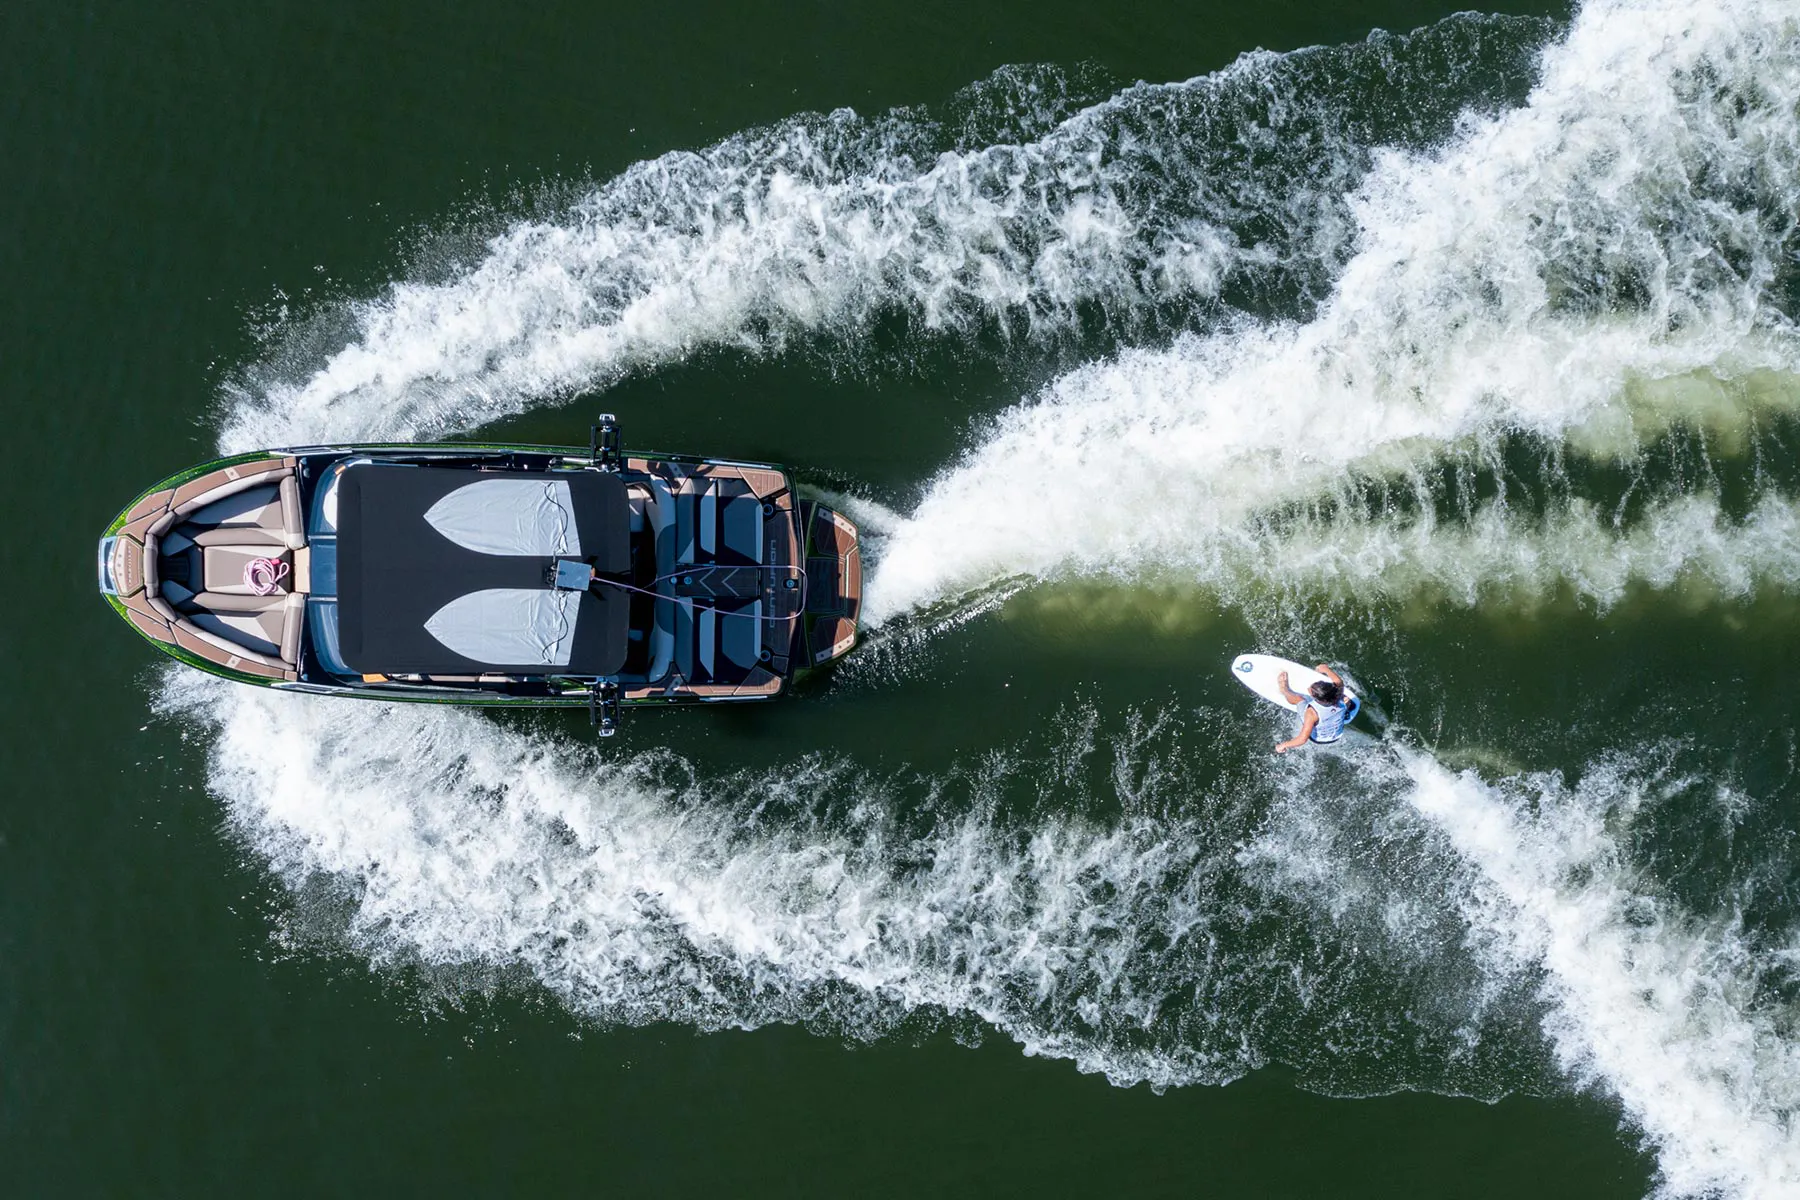 An aerial view of a person riding a wakesurf board on a boat.